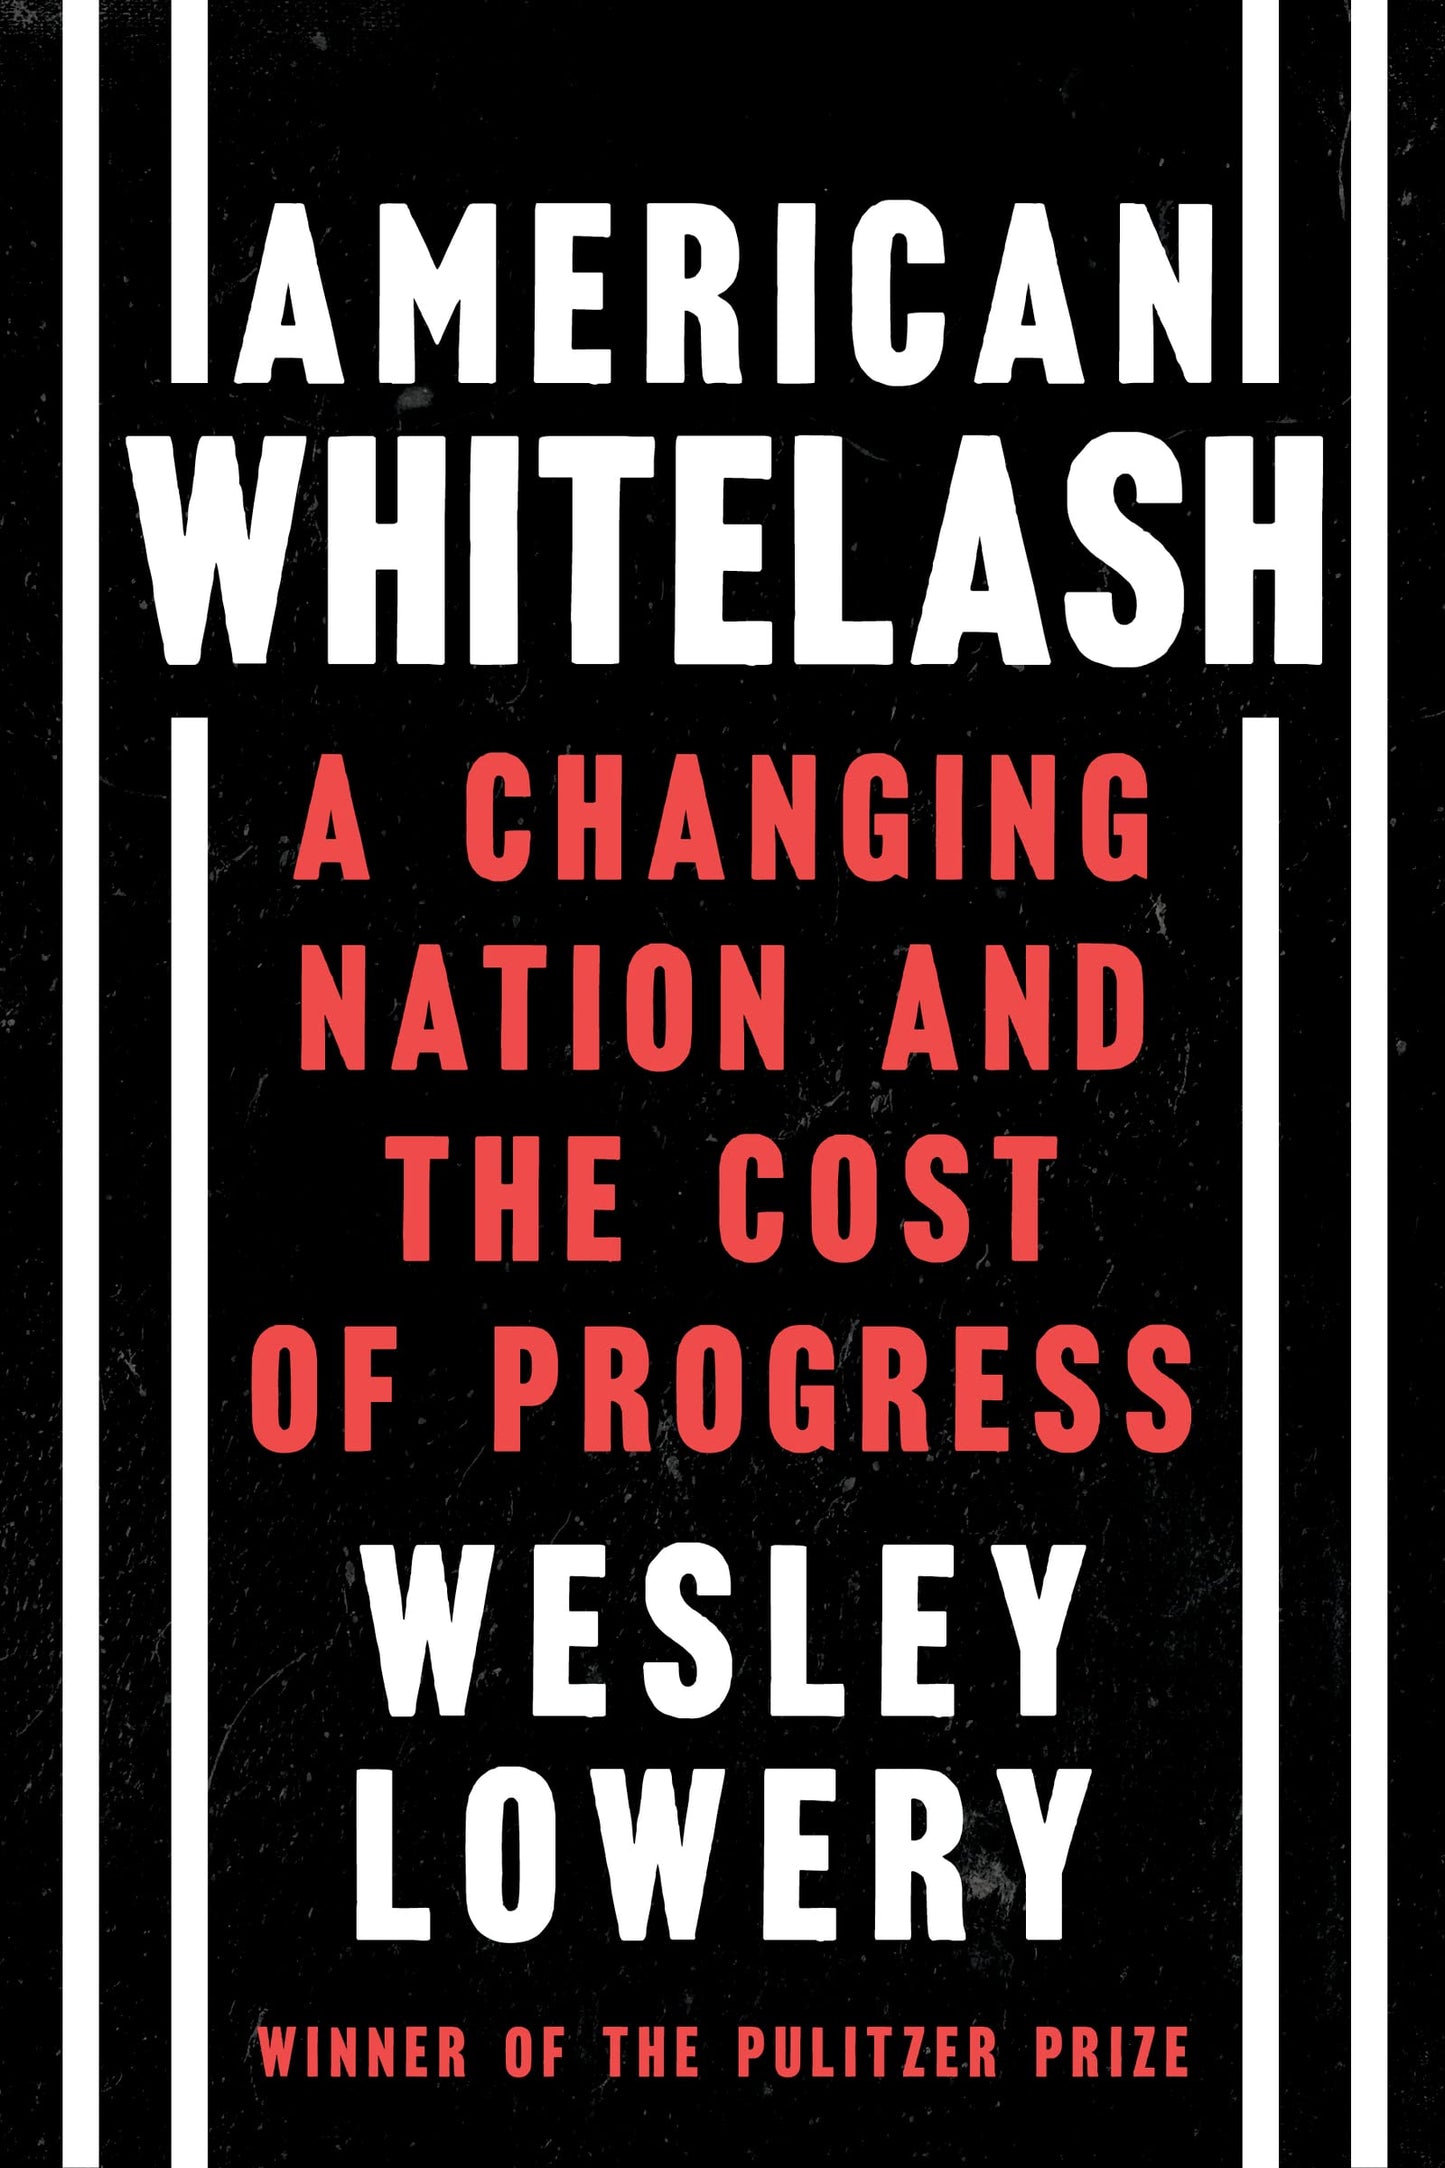 American Whitelash // A Changing Nation and the Cost of Progress